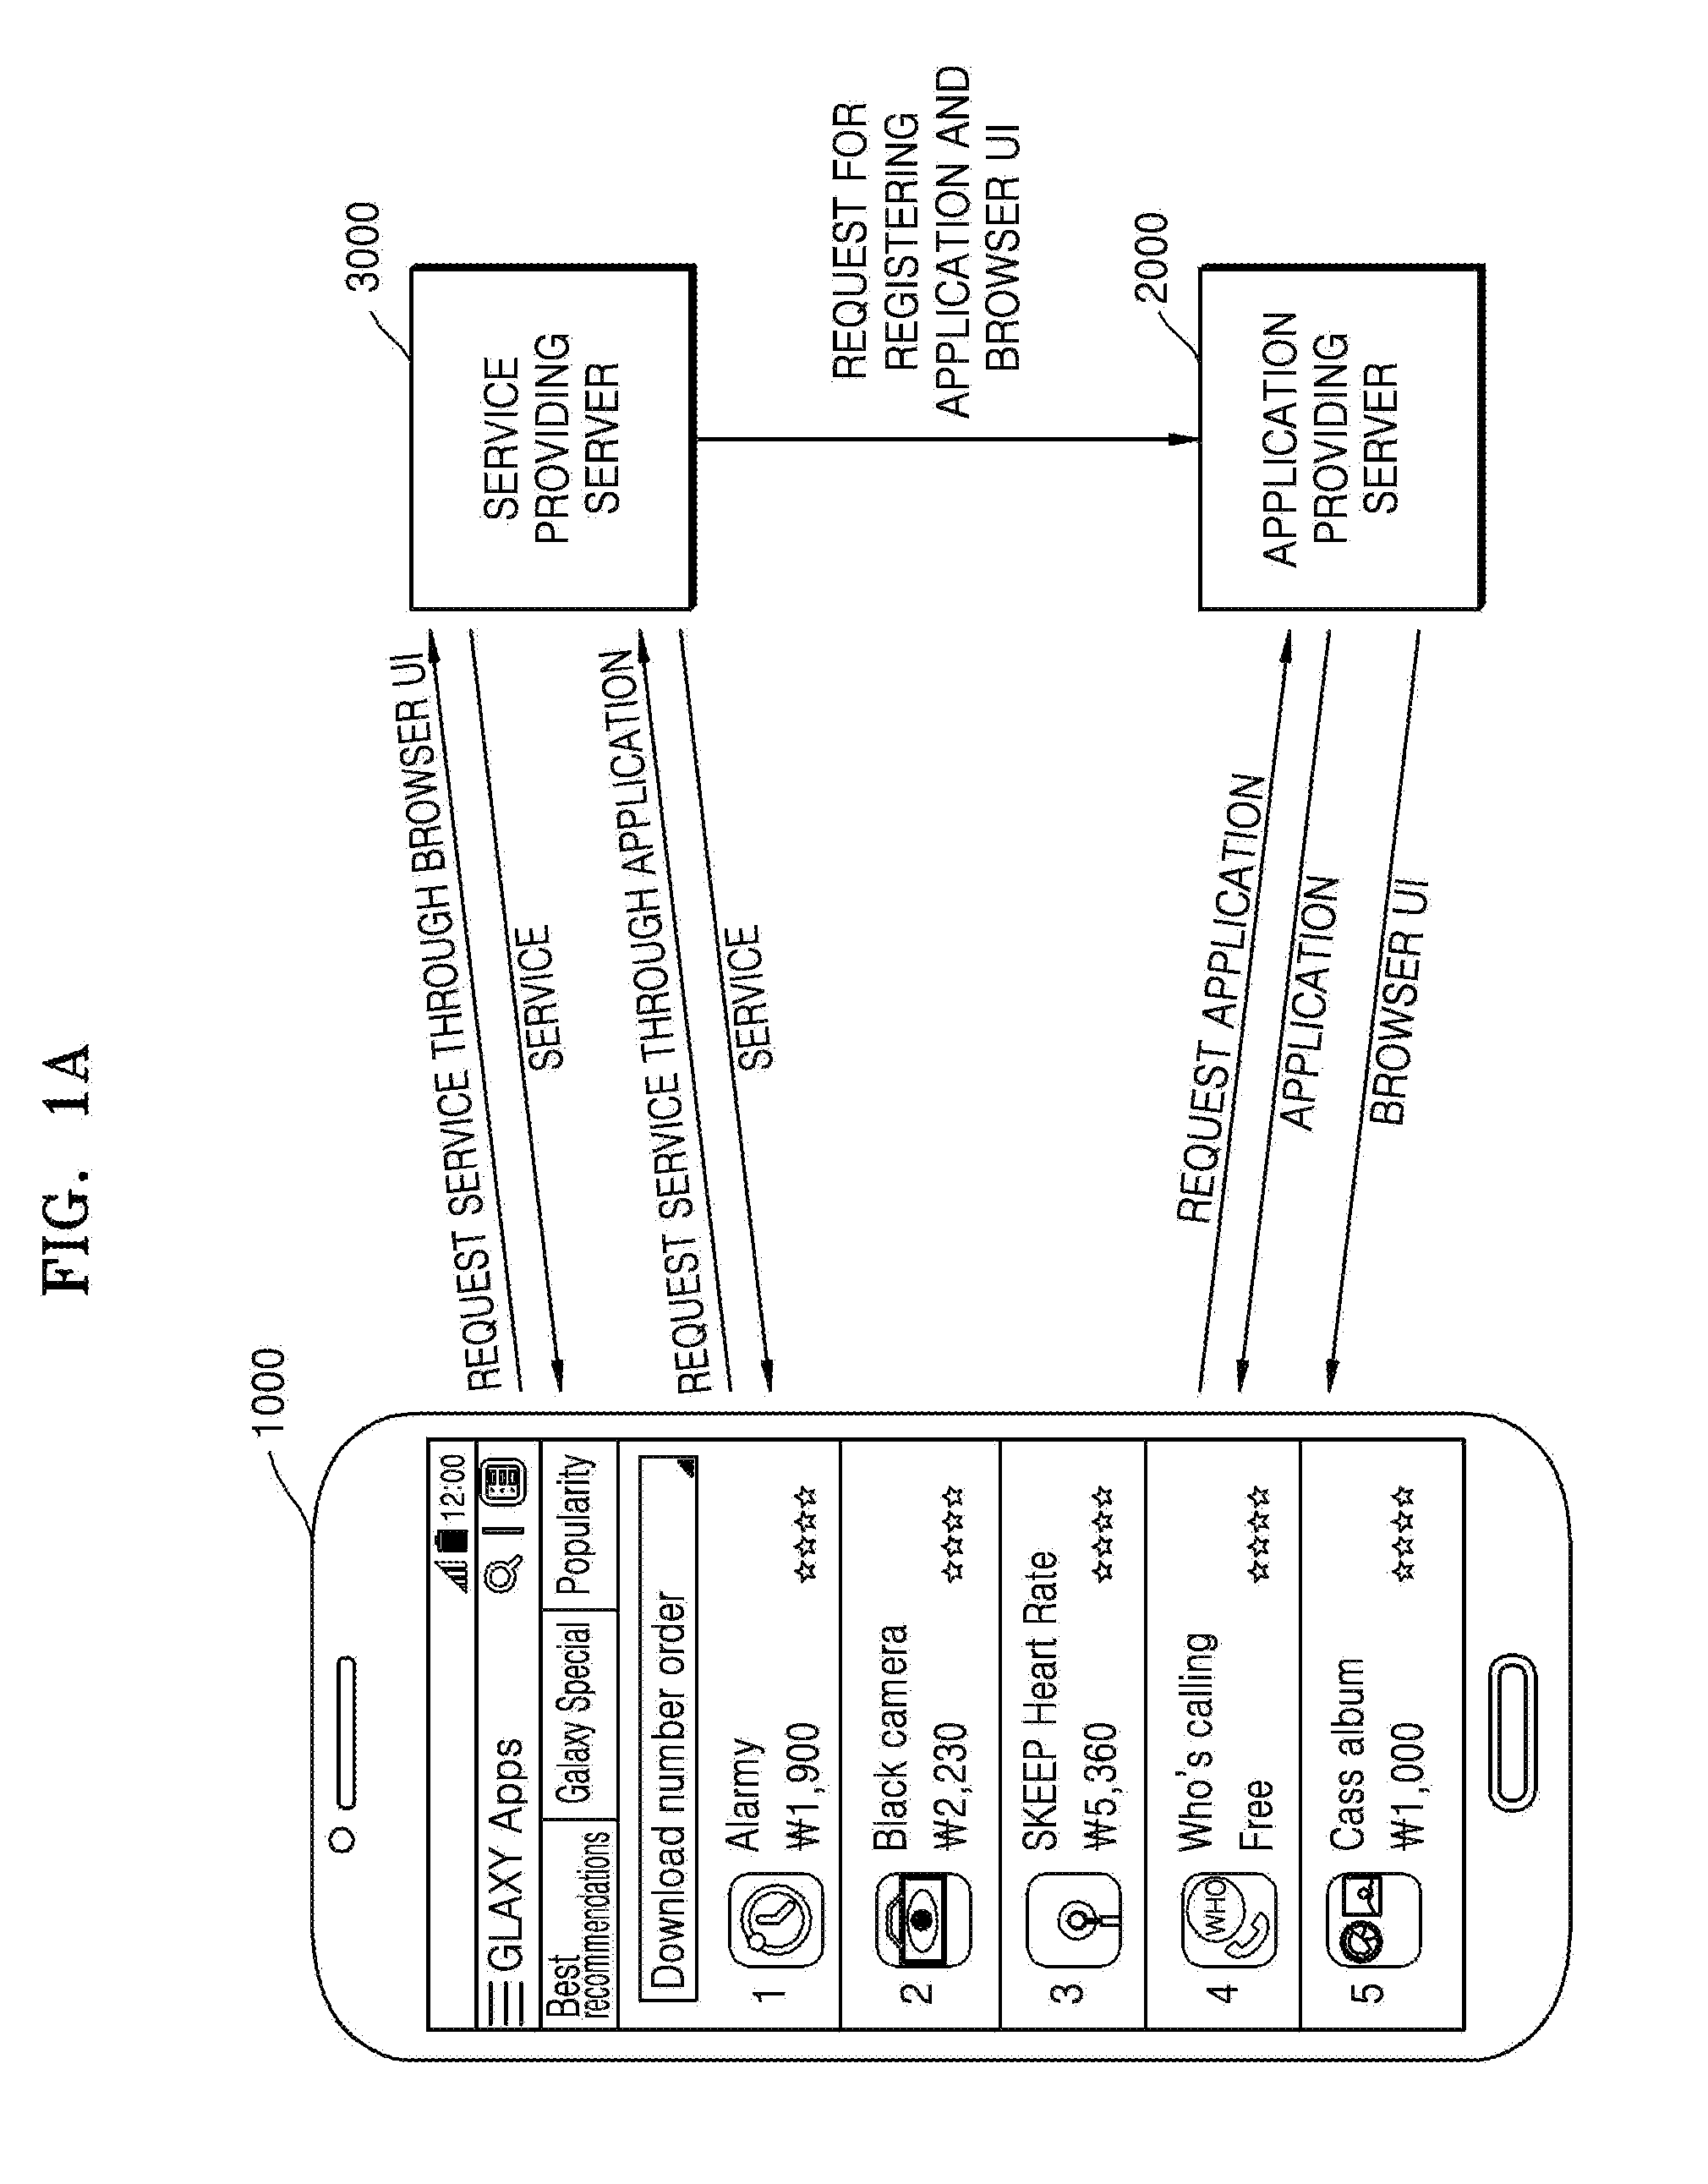 System and method for providing service via application